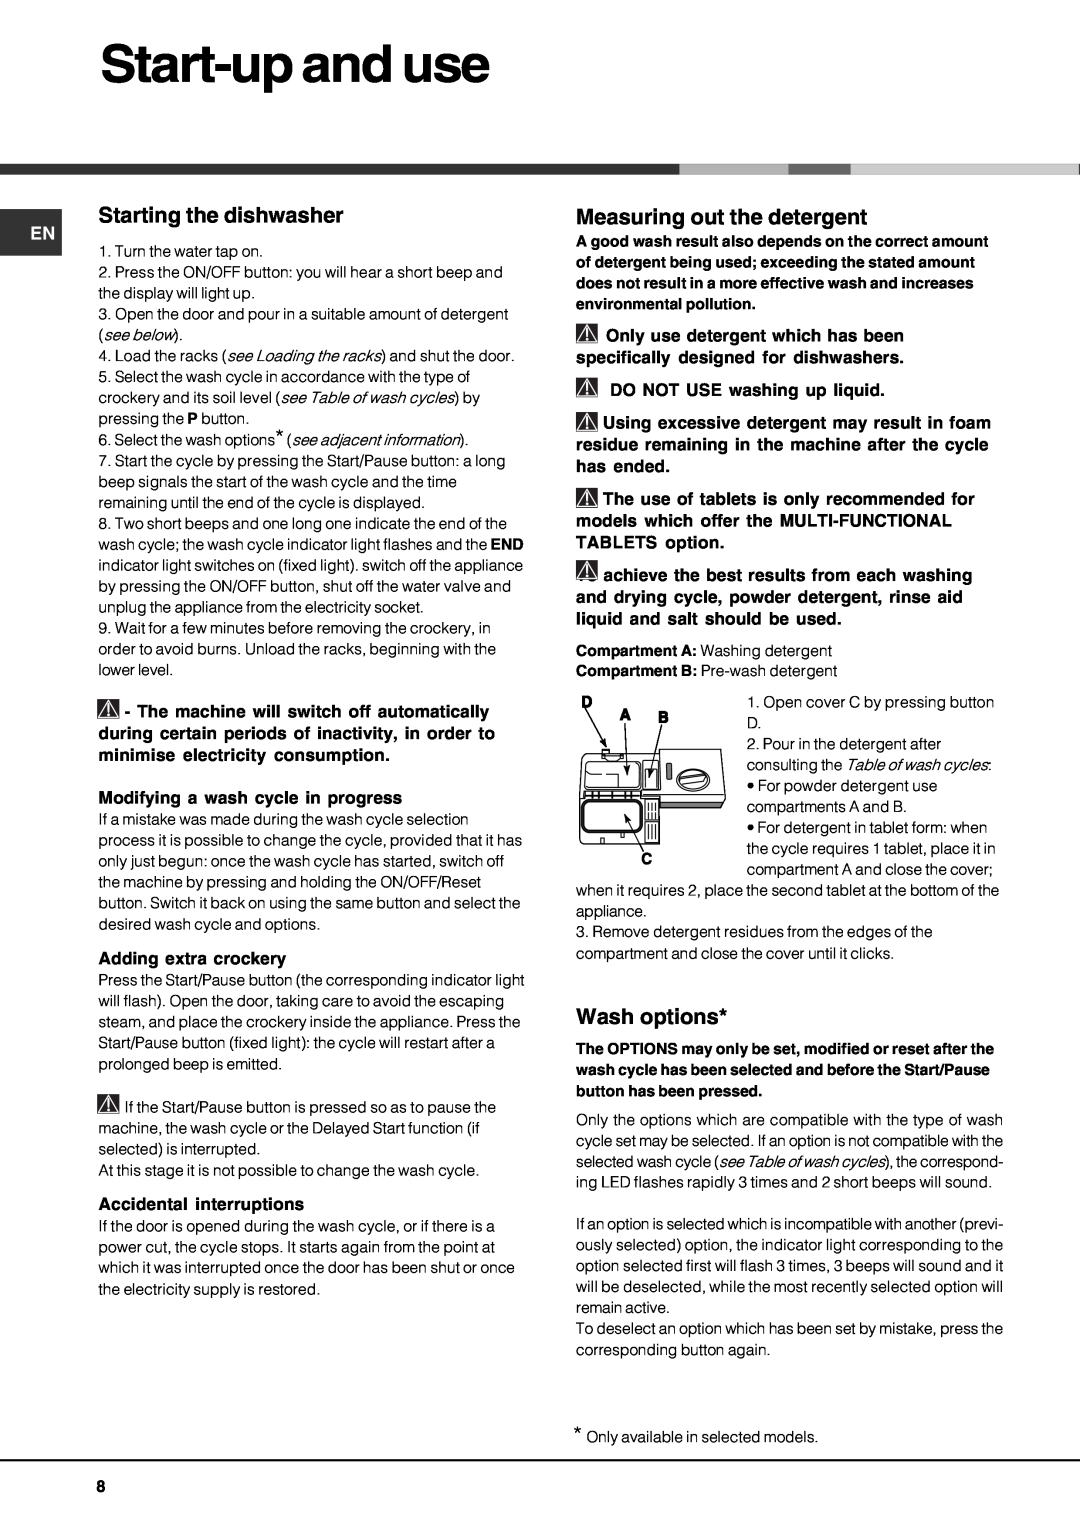 Hotpoint FDPF 481 manual Start-upand use, Starting the dishwasher, Measuring out the detergent, Wash options 